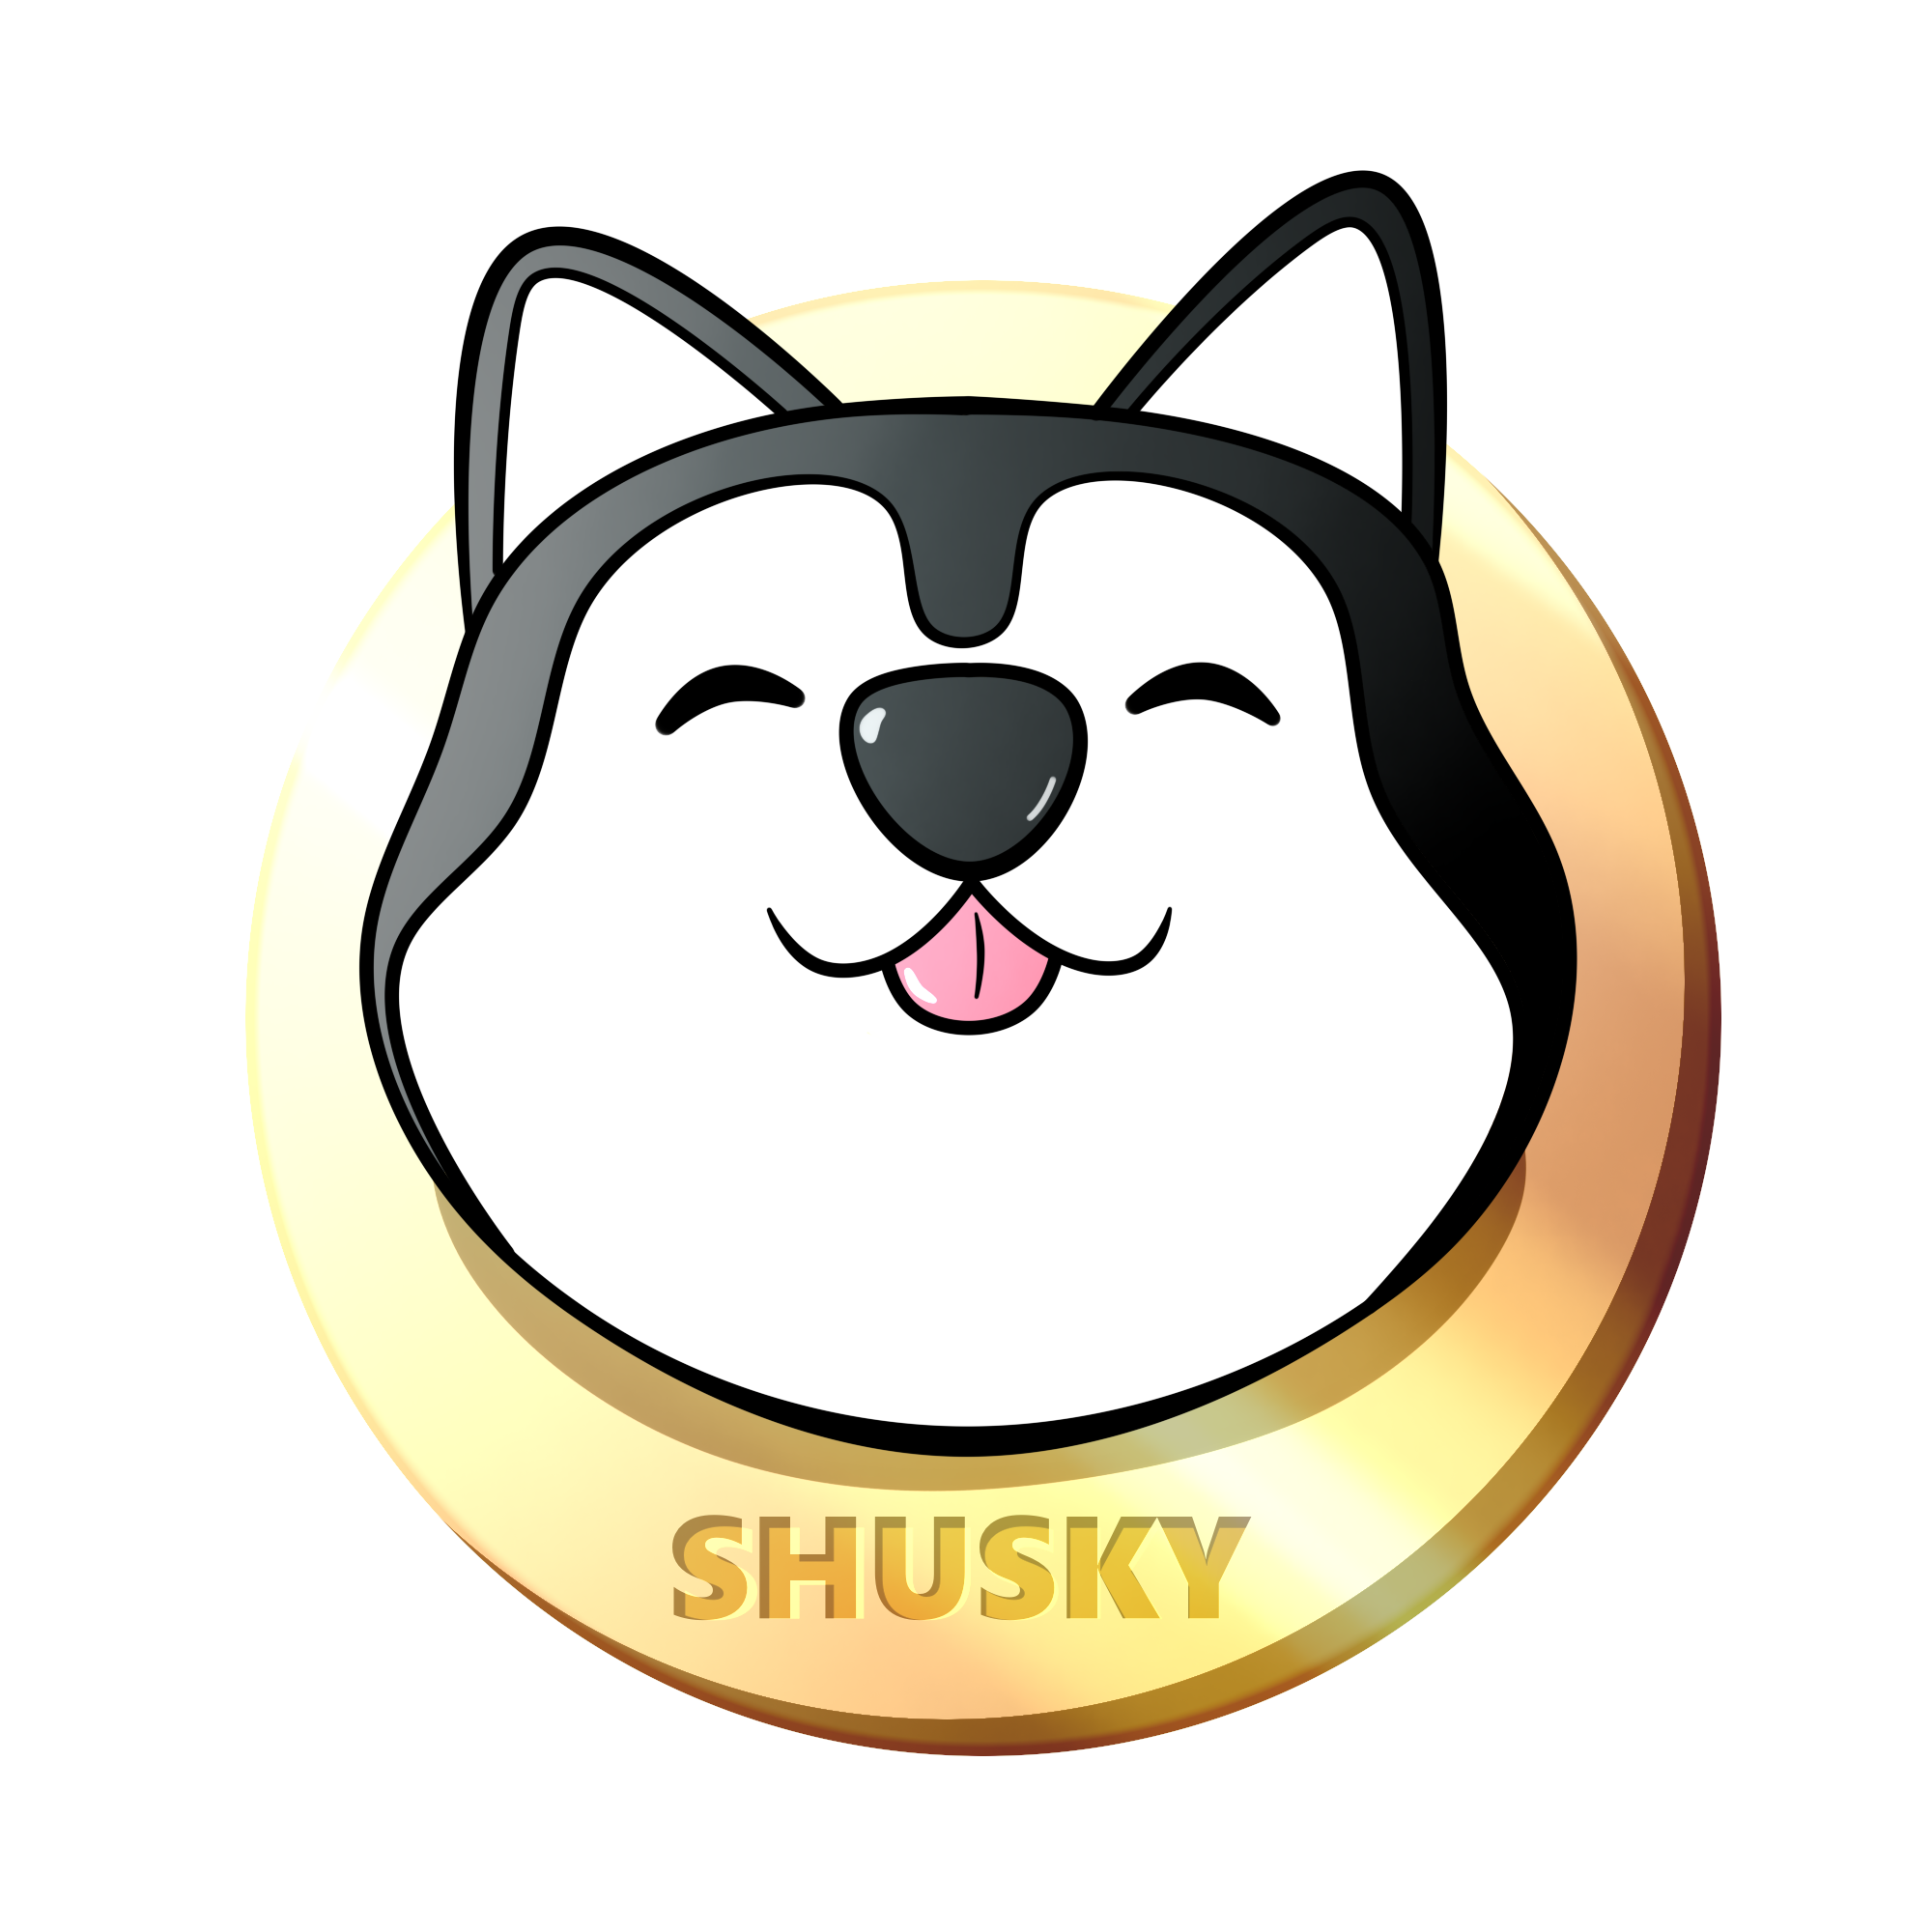 Buy husky crypto buying and selling bitcoin with least amount of fees